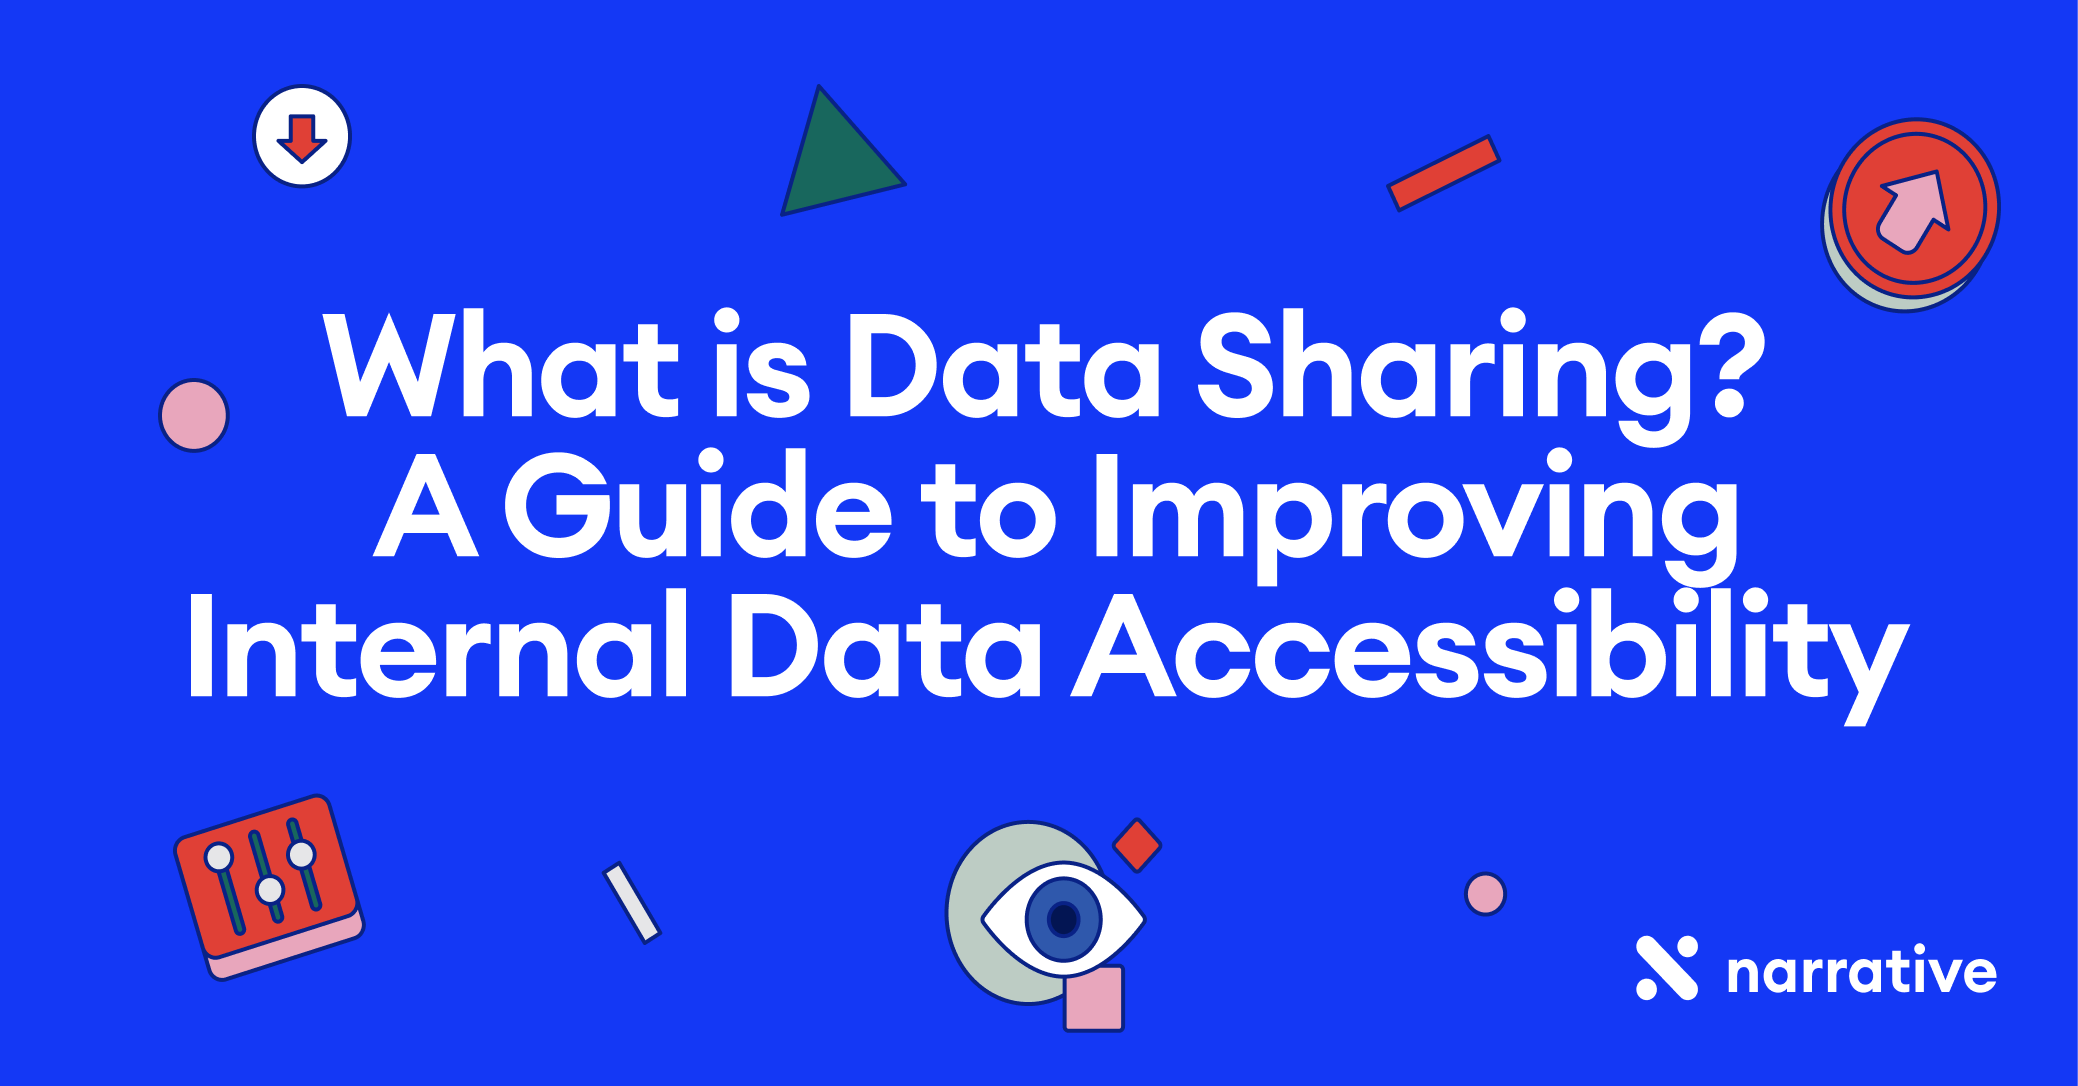 What is Data Sharing? A Guide to Improving Internal Data Accessibility